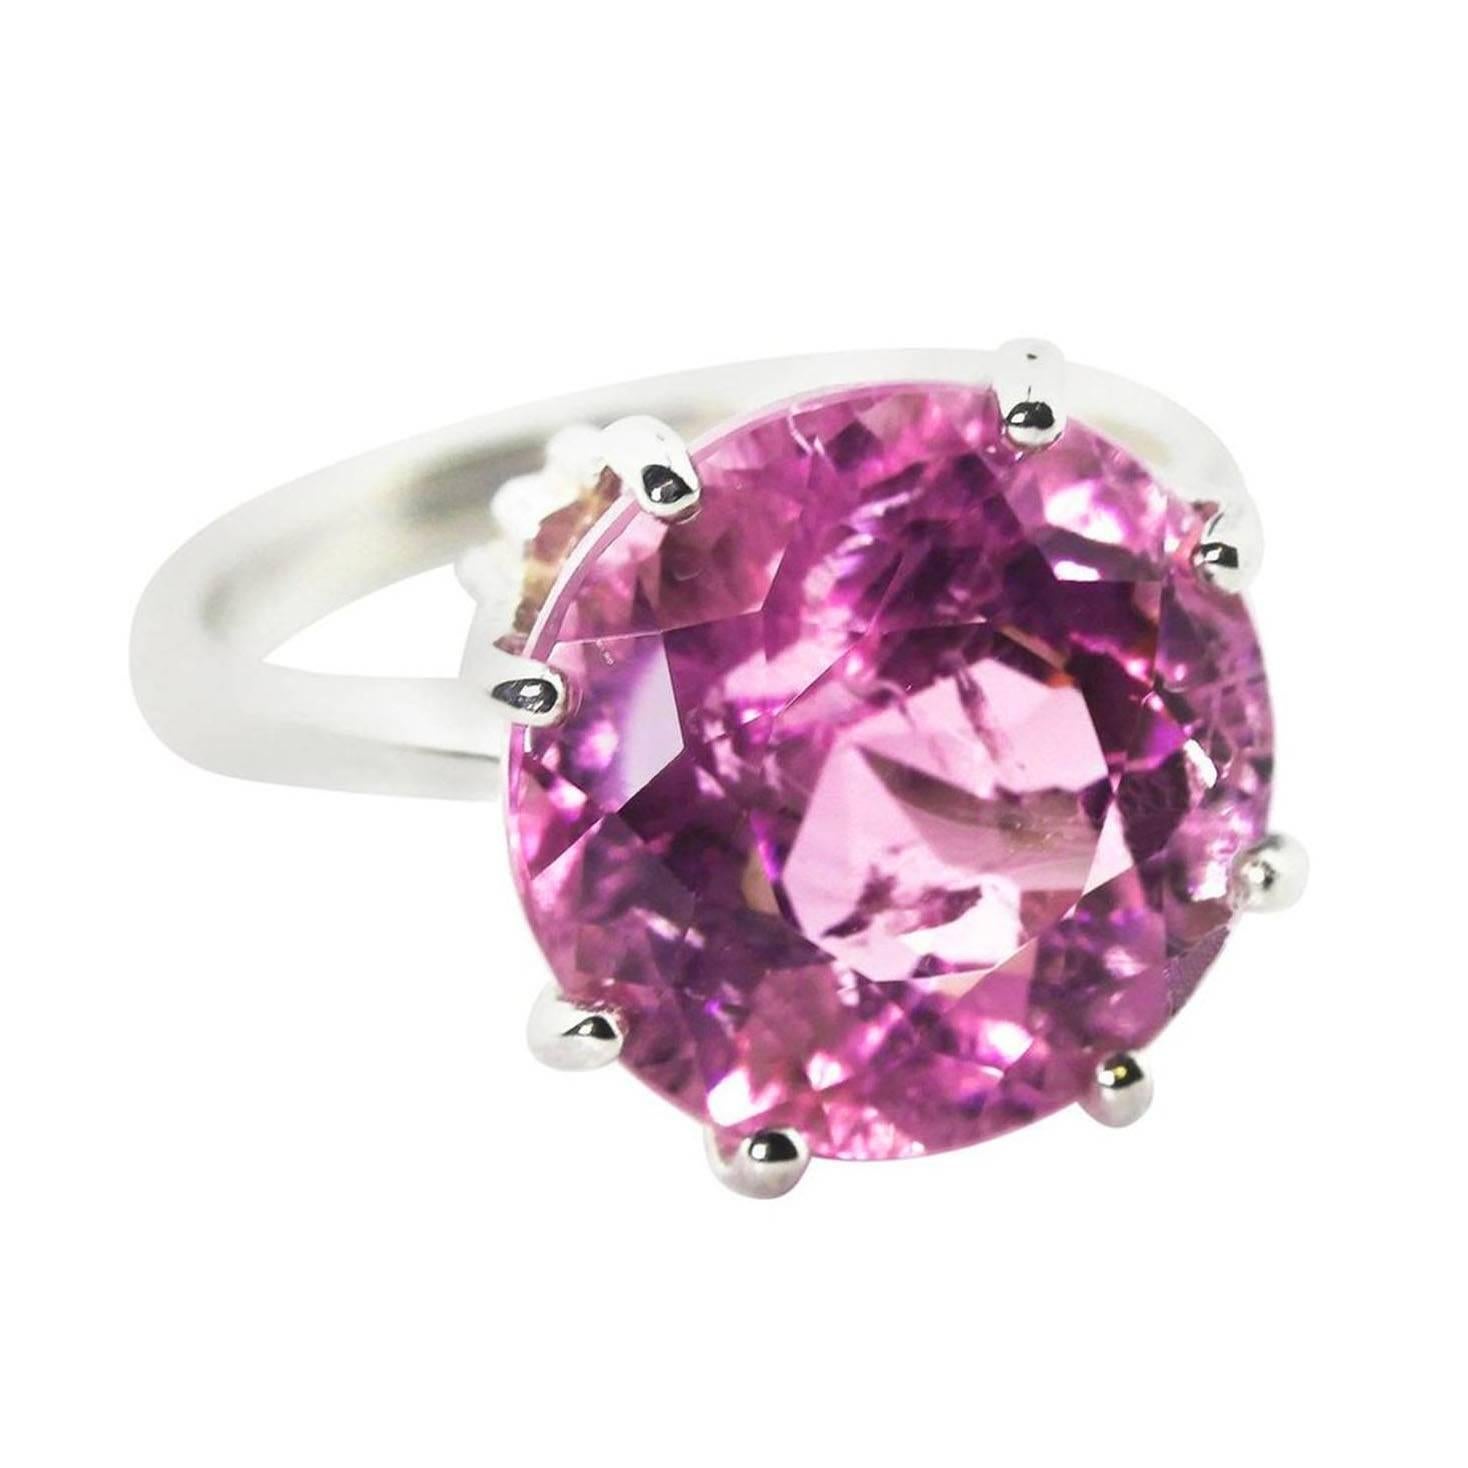 AJD Magnificent Solitaire 14 Cts Round Pink Kunzite Sterling Silver Ring